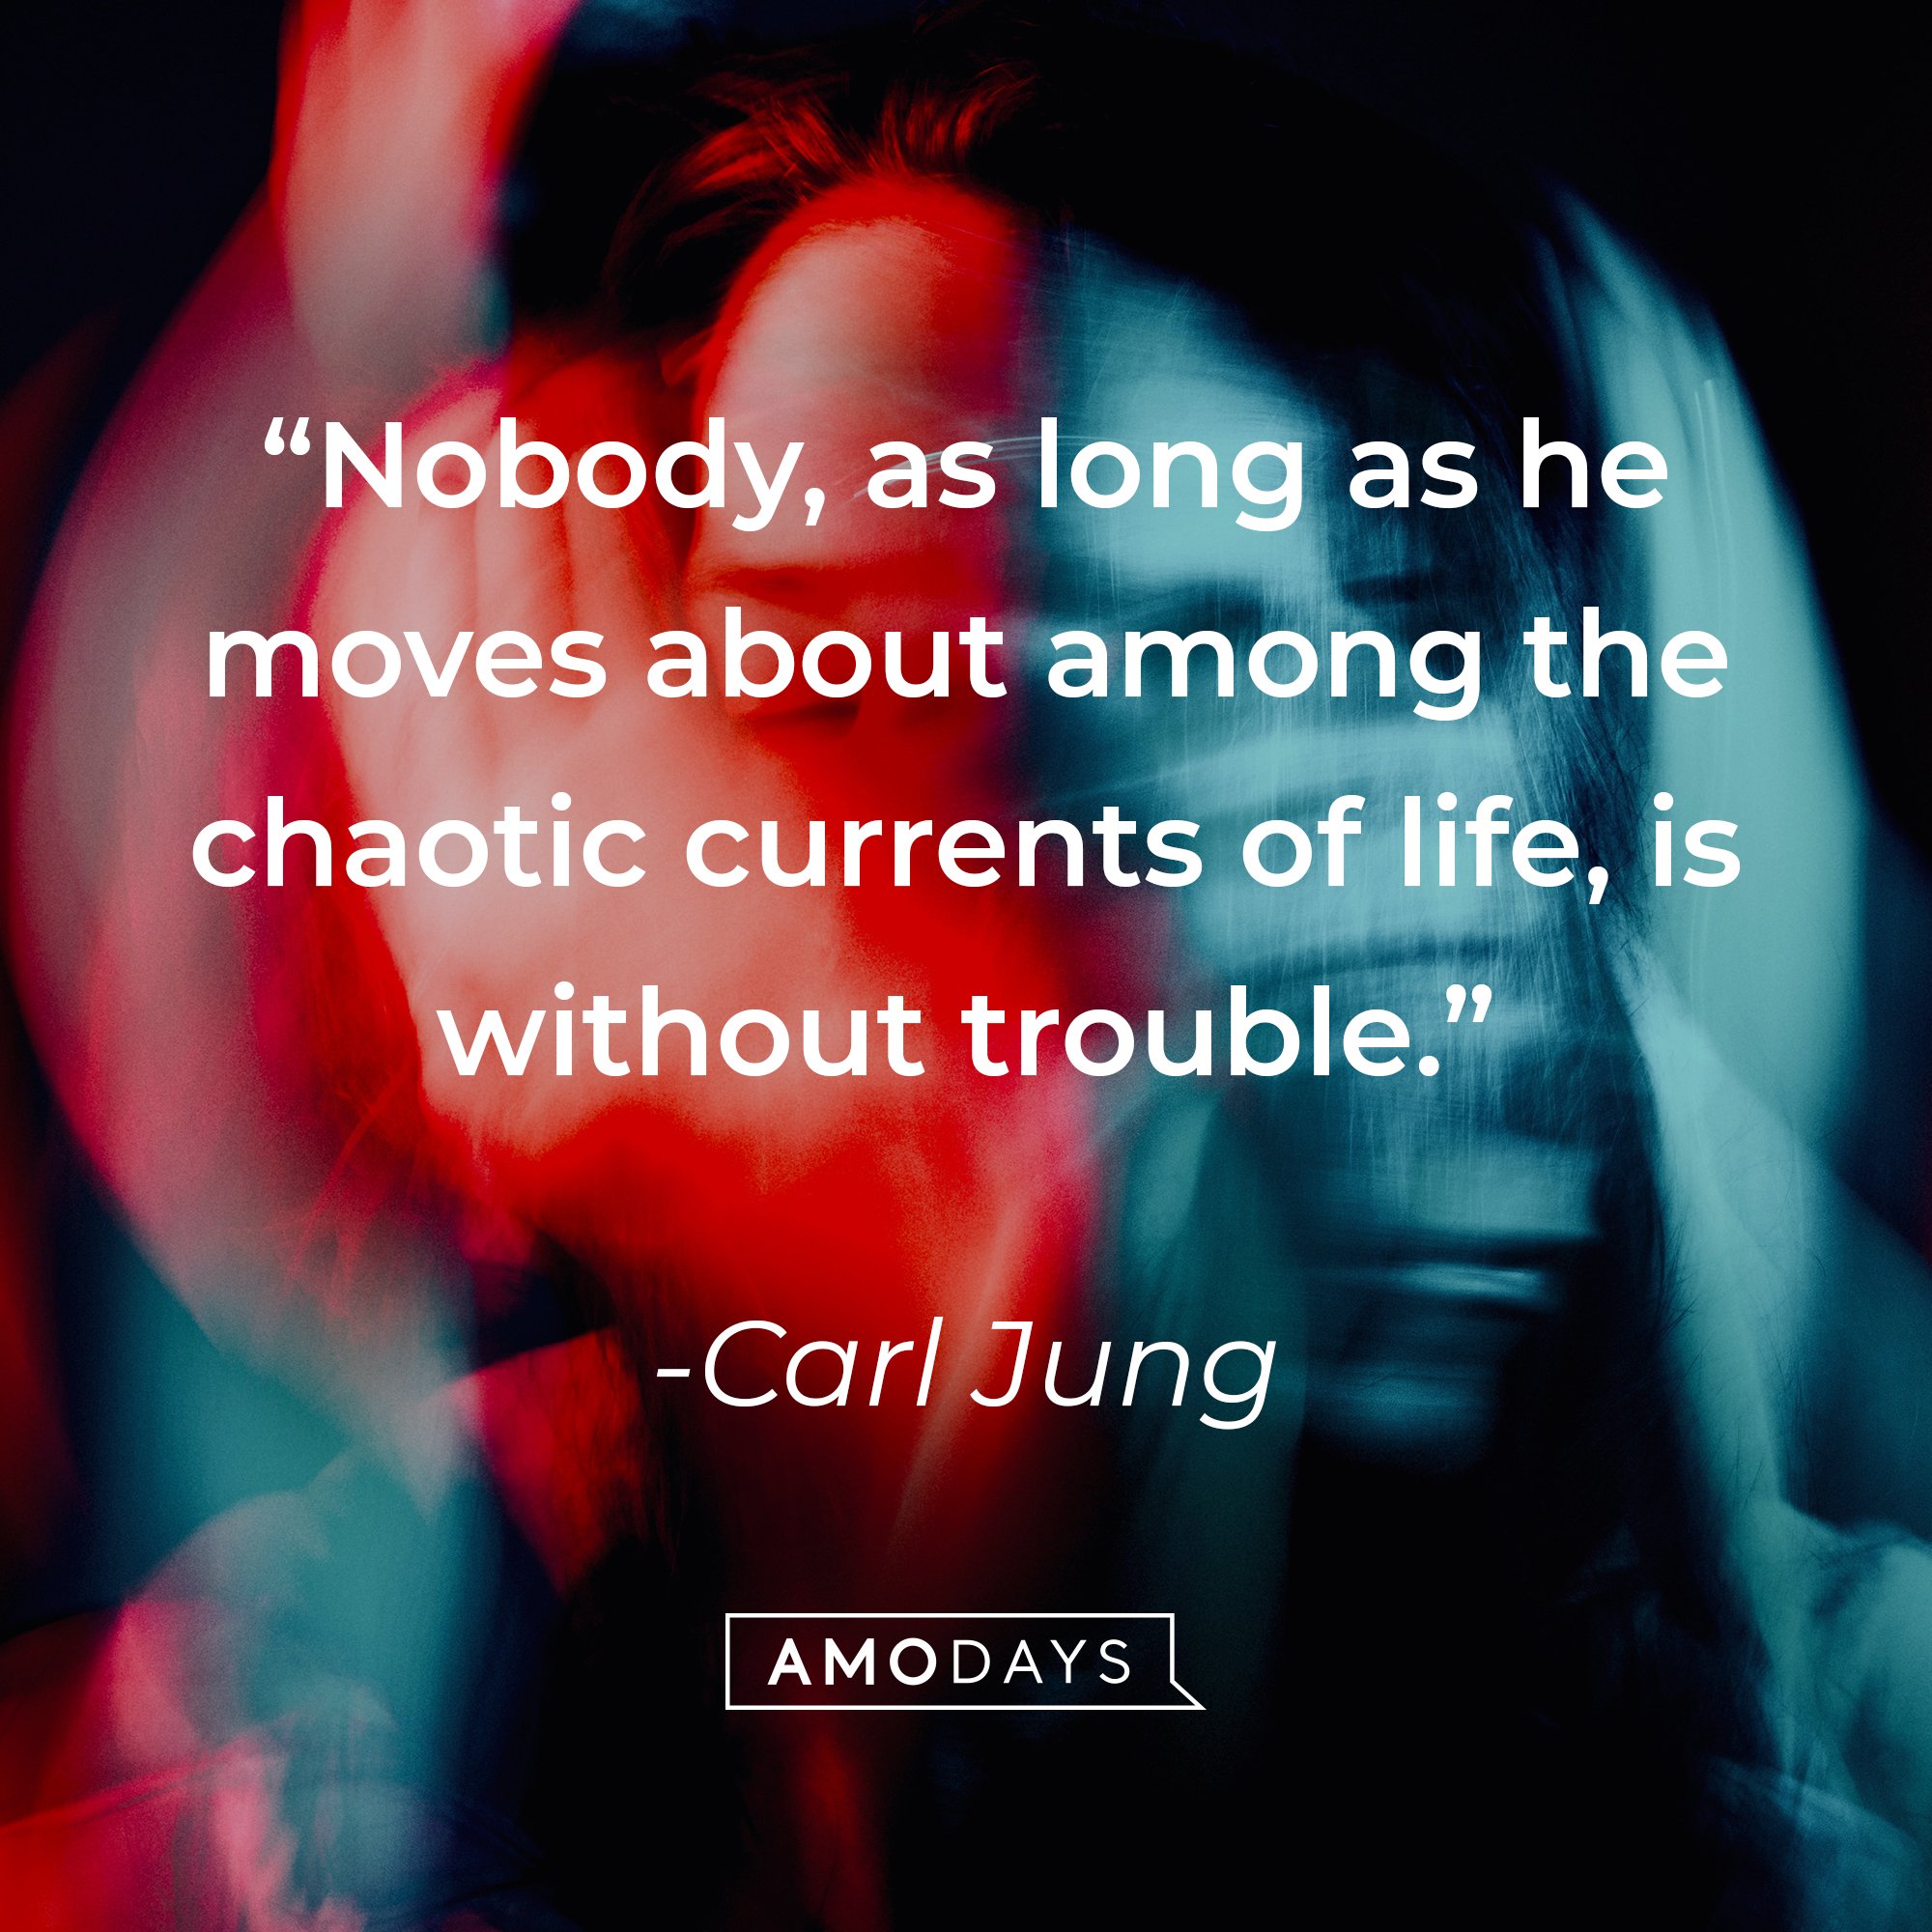 Carl Jung’s quote: “Nobody, as long as he moves about among the chaotic currents of life, is without trouble.” | Image: Amodays